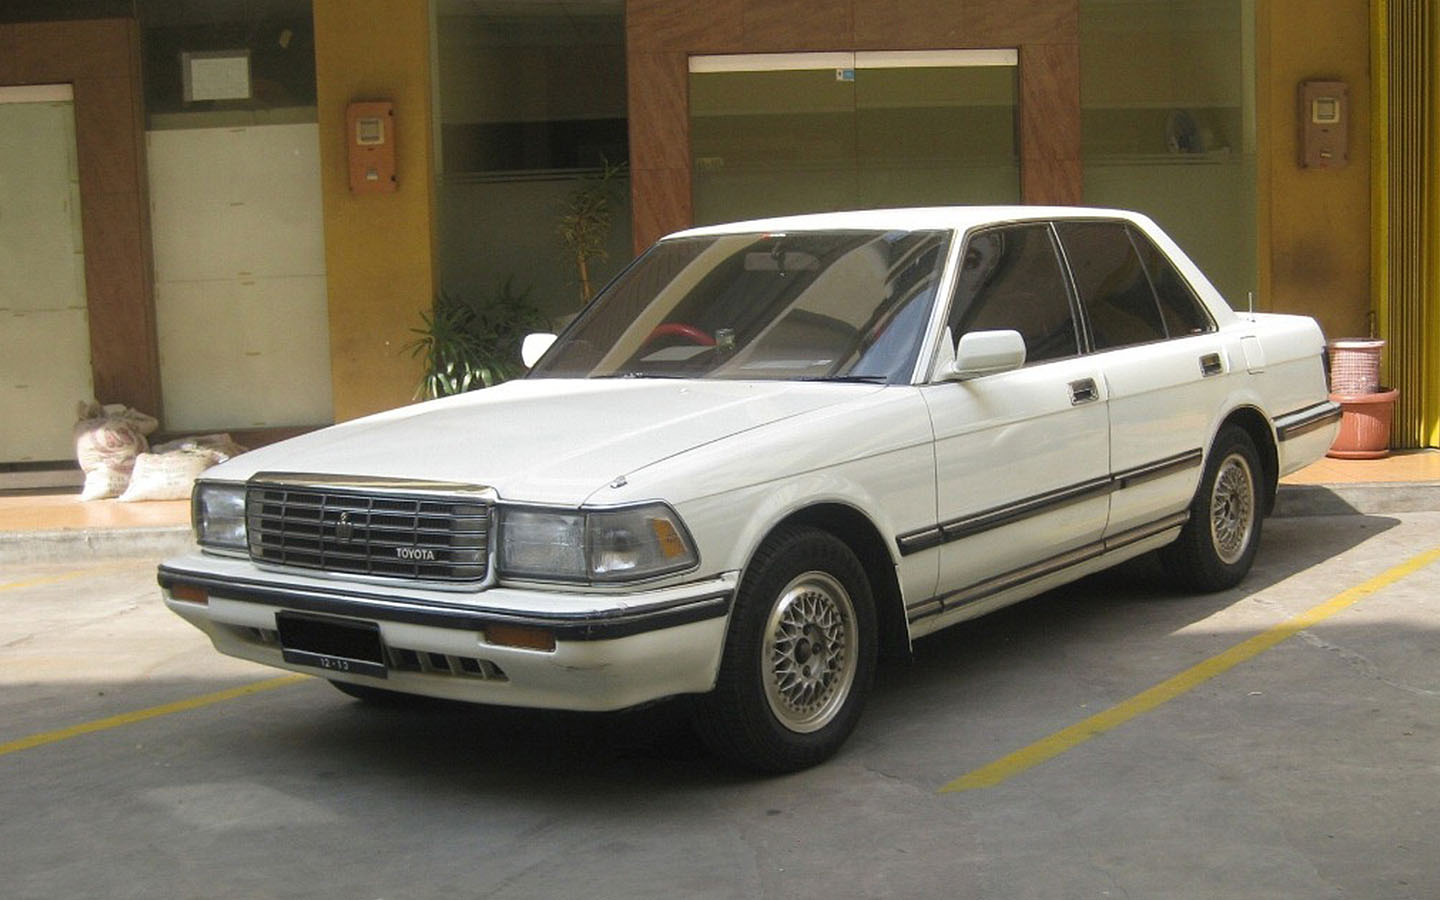 Traction control introduced in eighth generation Toyota Crown 1987